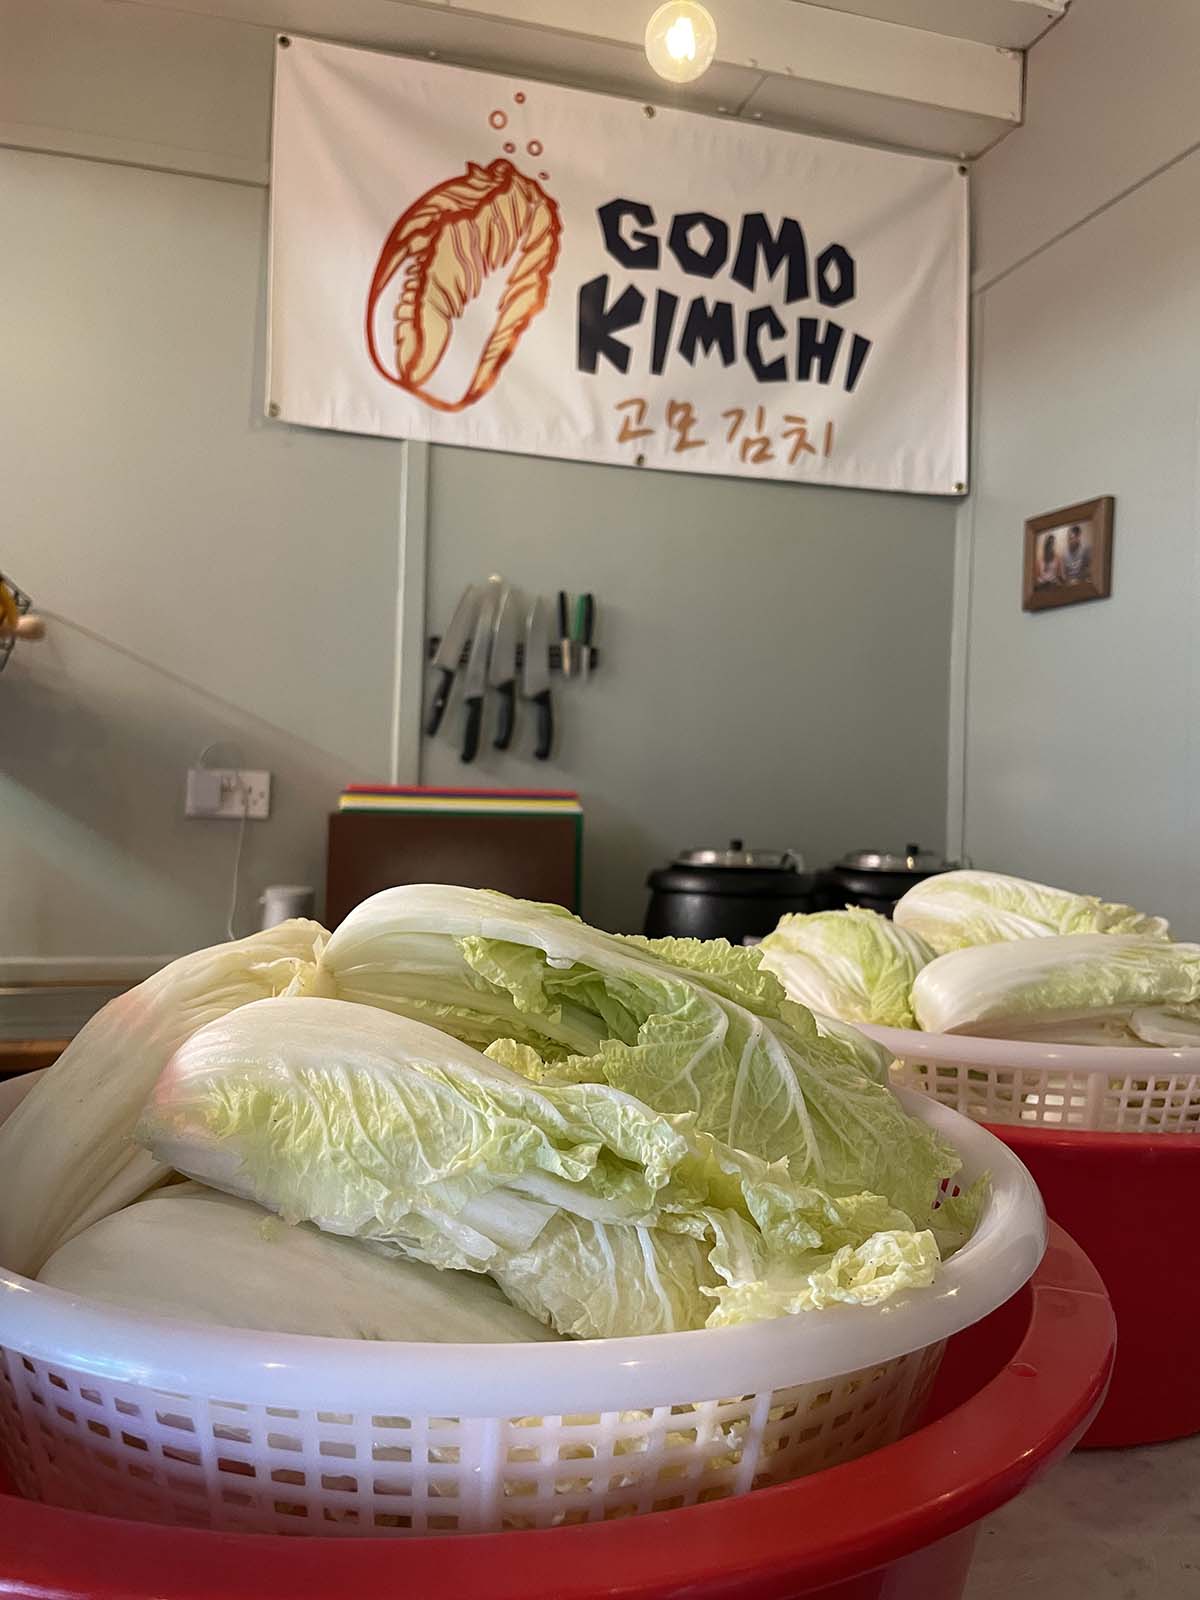 two large baskets of Korean cabbage sit under a sign saying 'Gomo Kimchi'